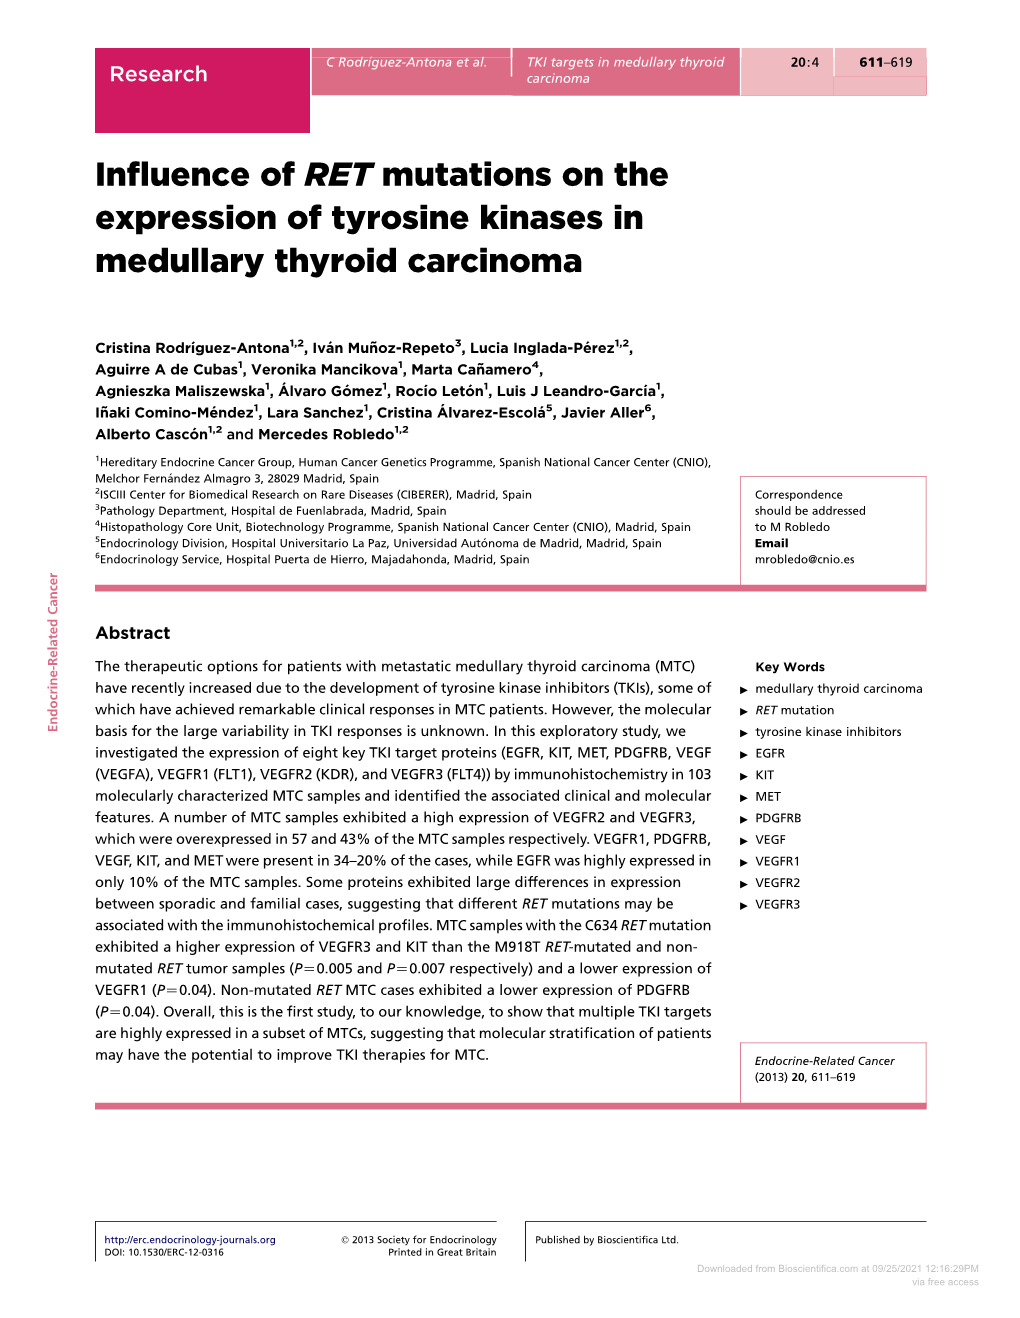 Influence of RET Mutations on the Expression of Tyrosine Kinases In